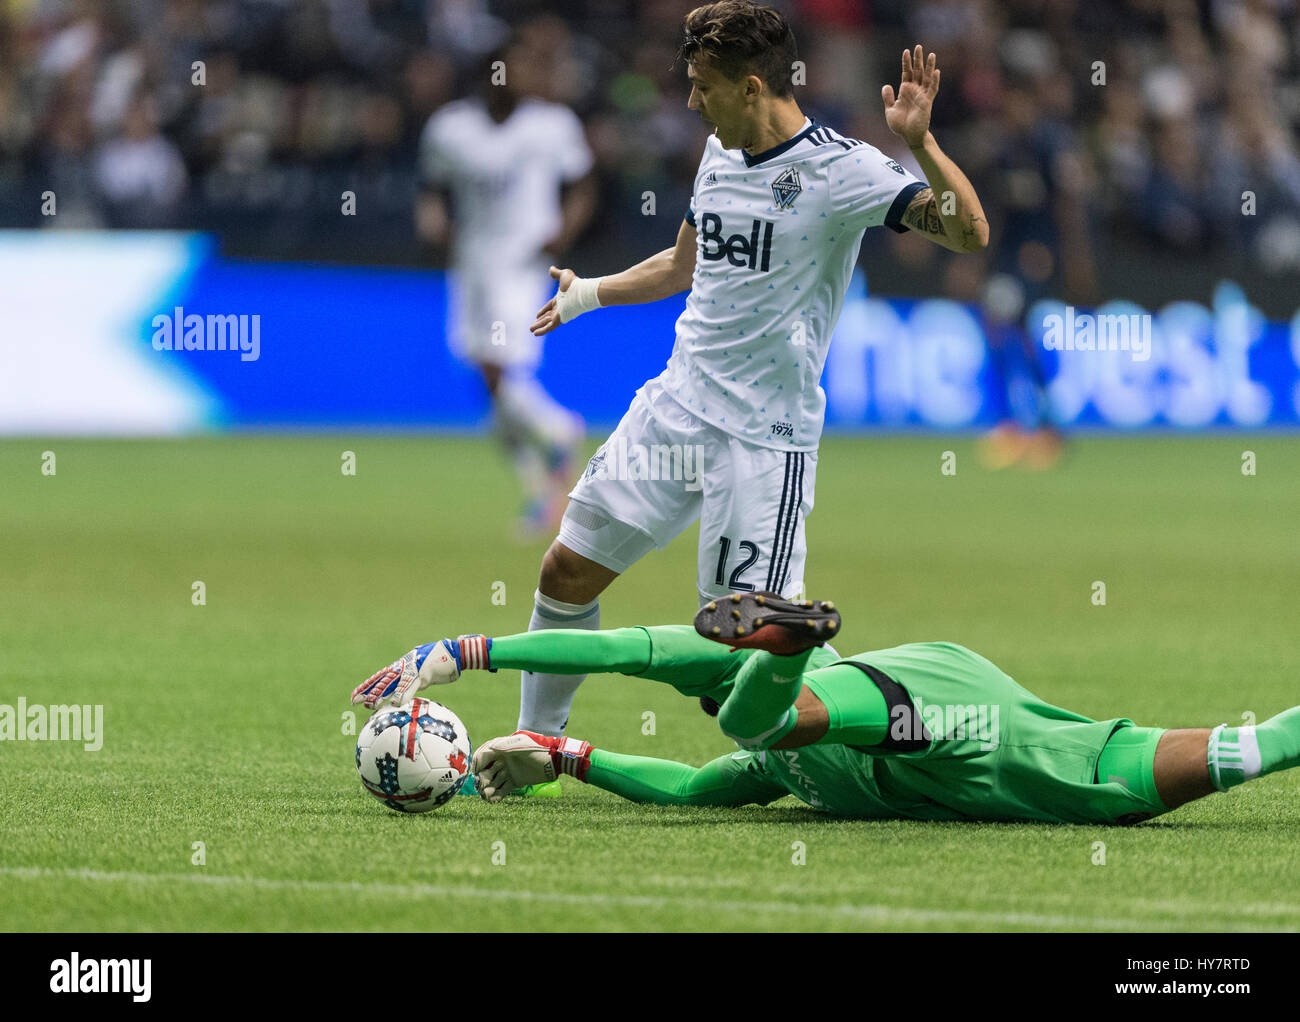 Vancouver, Canada. 1 April, 2017. Goalkeeper Clement Diop (31) of Los Angeles Galaxy, grabbing the ball from Fredy Montero (12) of Vancouver Whitecaps. Vancouver defeats Los Angeles 4-2, with Whitecap goals from Cristian Techera (13), Fredy Montero (12) and 2 goals from Matias Laba (15), Vancouver Whitecaps vs Los Angeles Galaxy, BC Place Stadium. © Gerry Rousseau/Alamy Live News Stock Photo